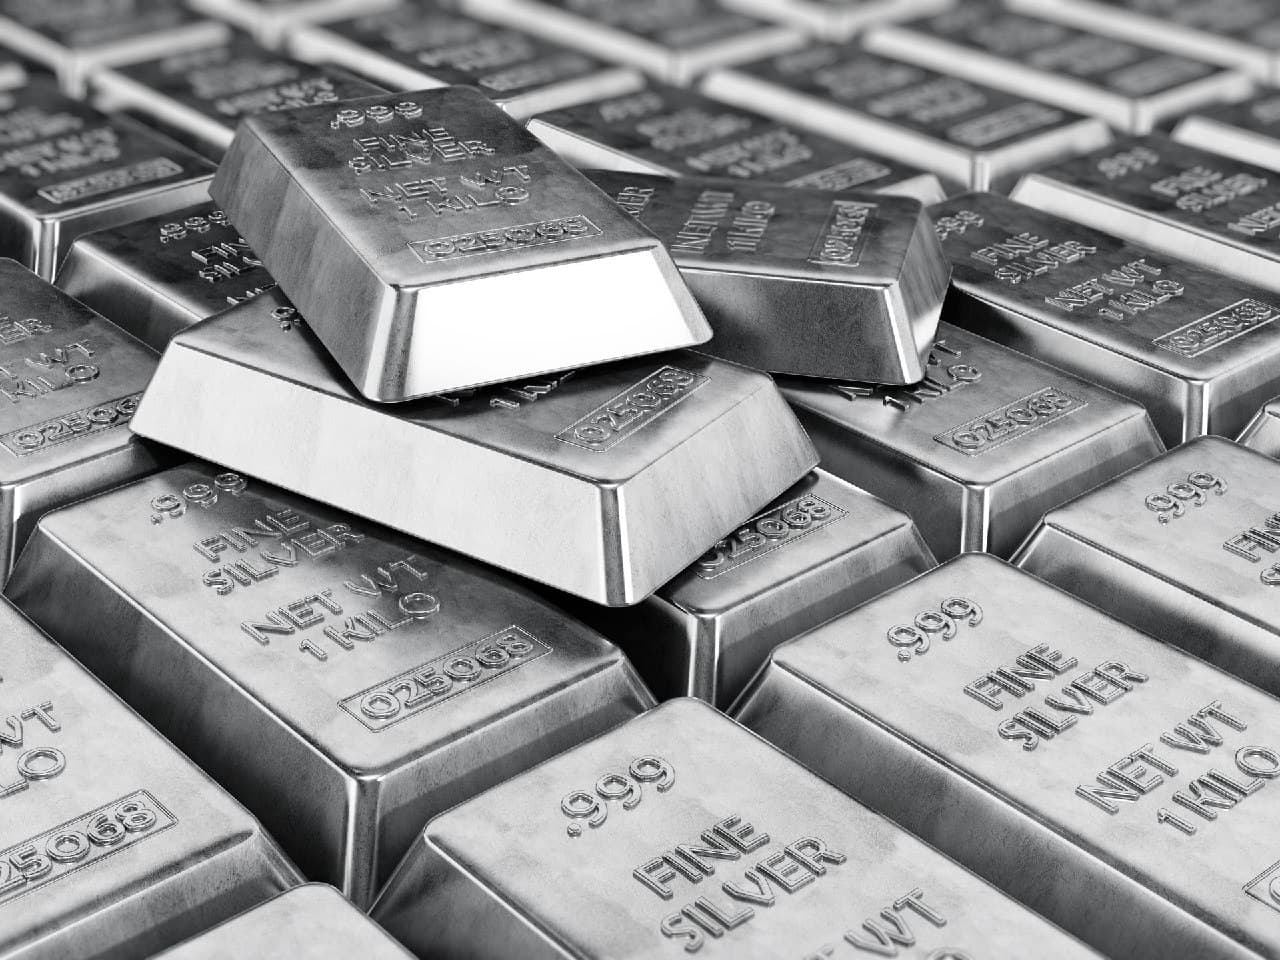 Silver has crossed 73,800 rupees, gold also becomes expensive